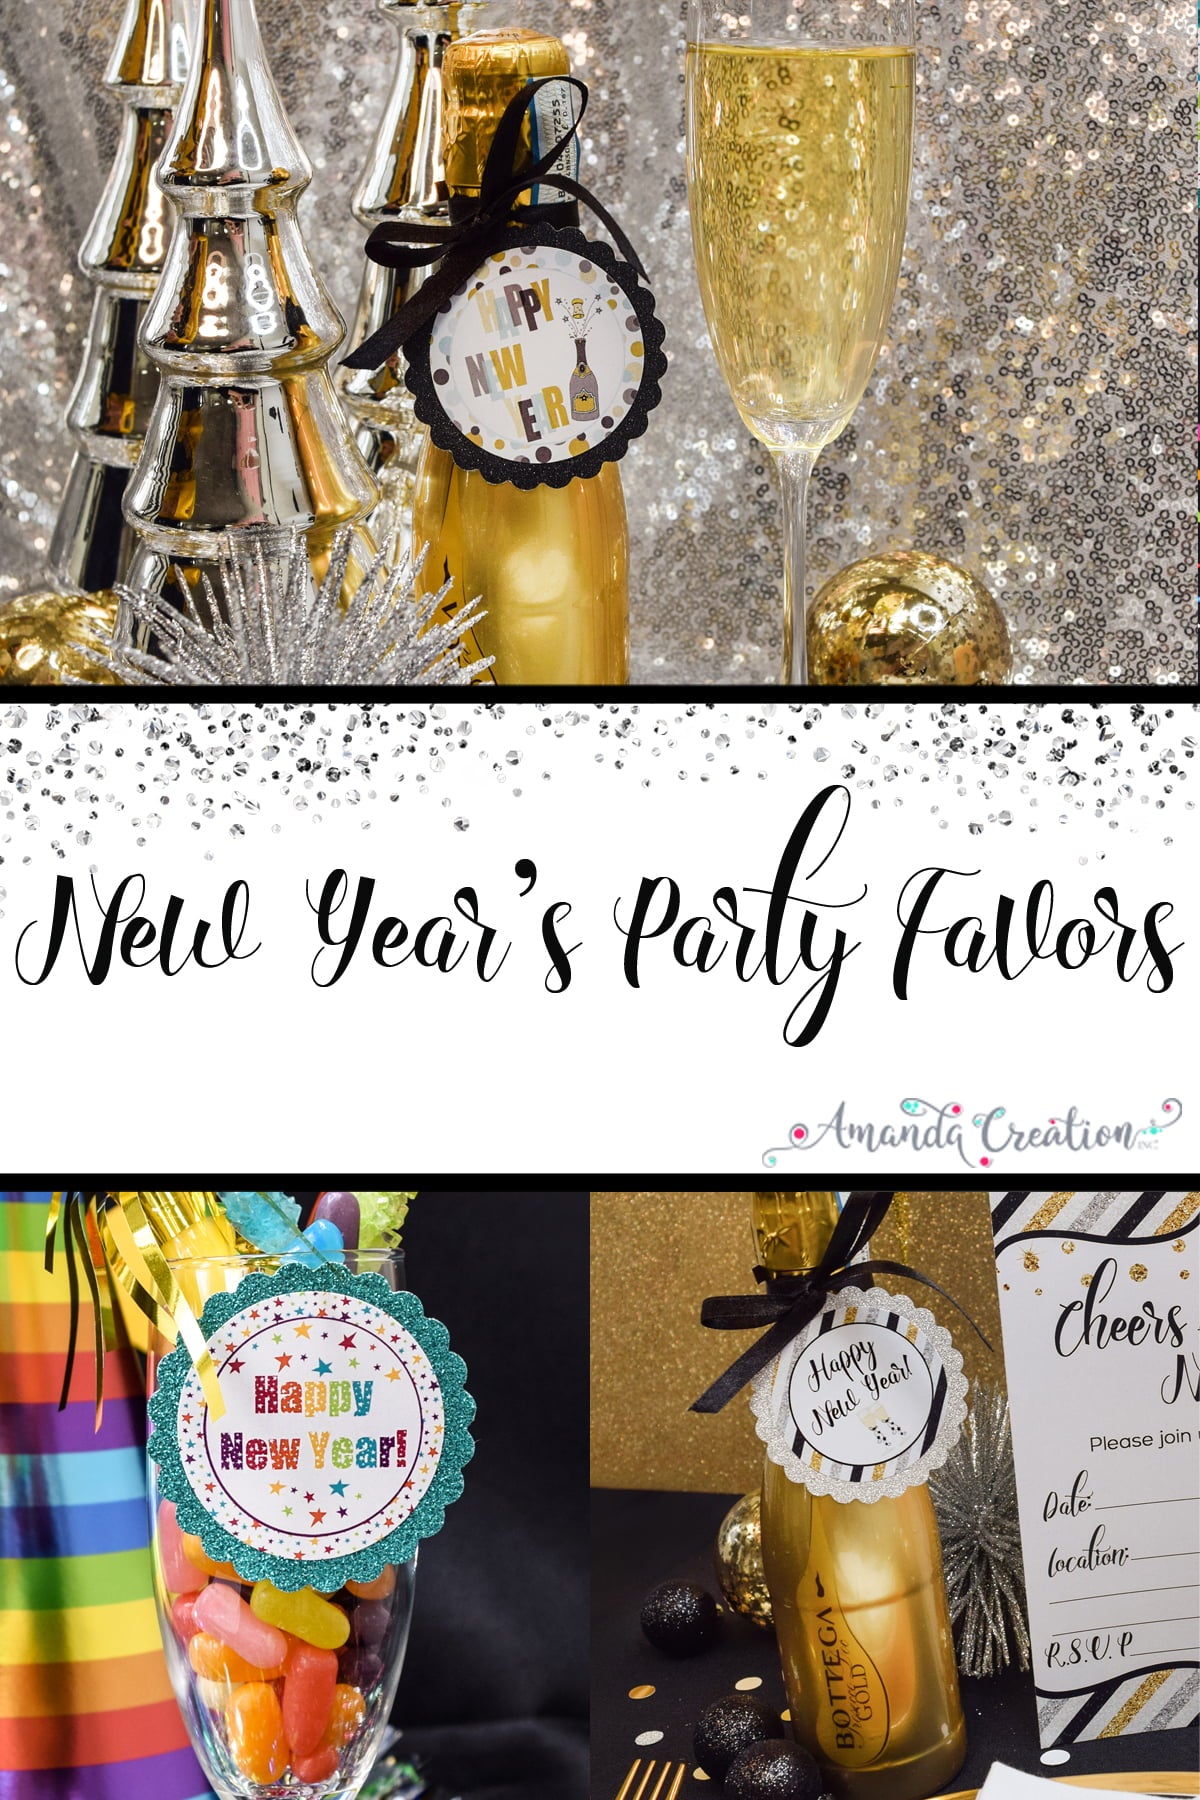 New Year's Party Favors